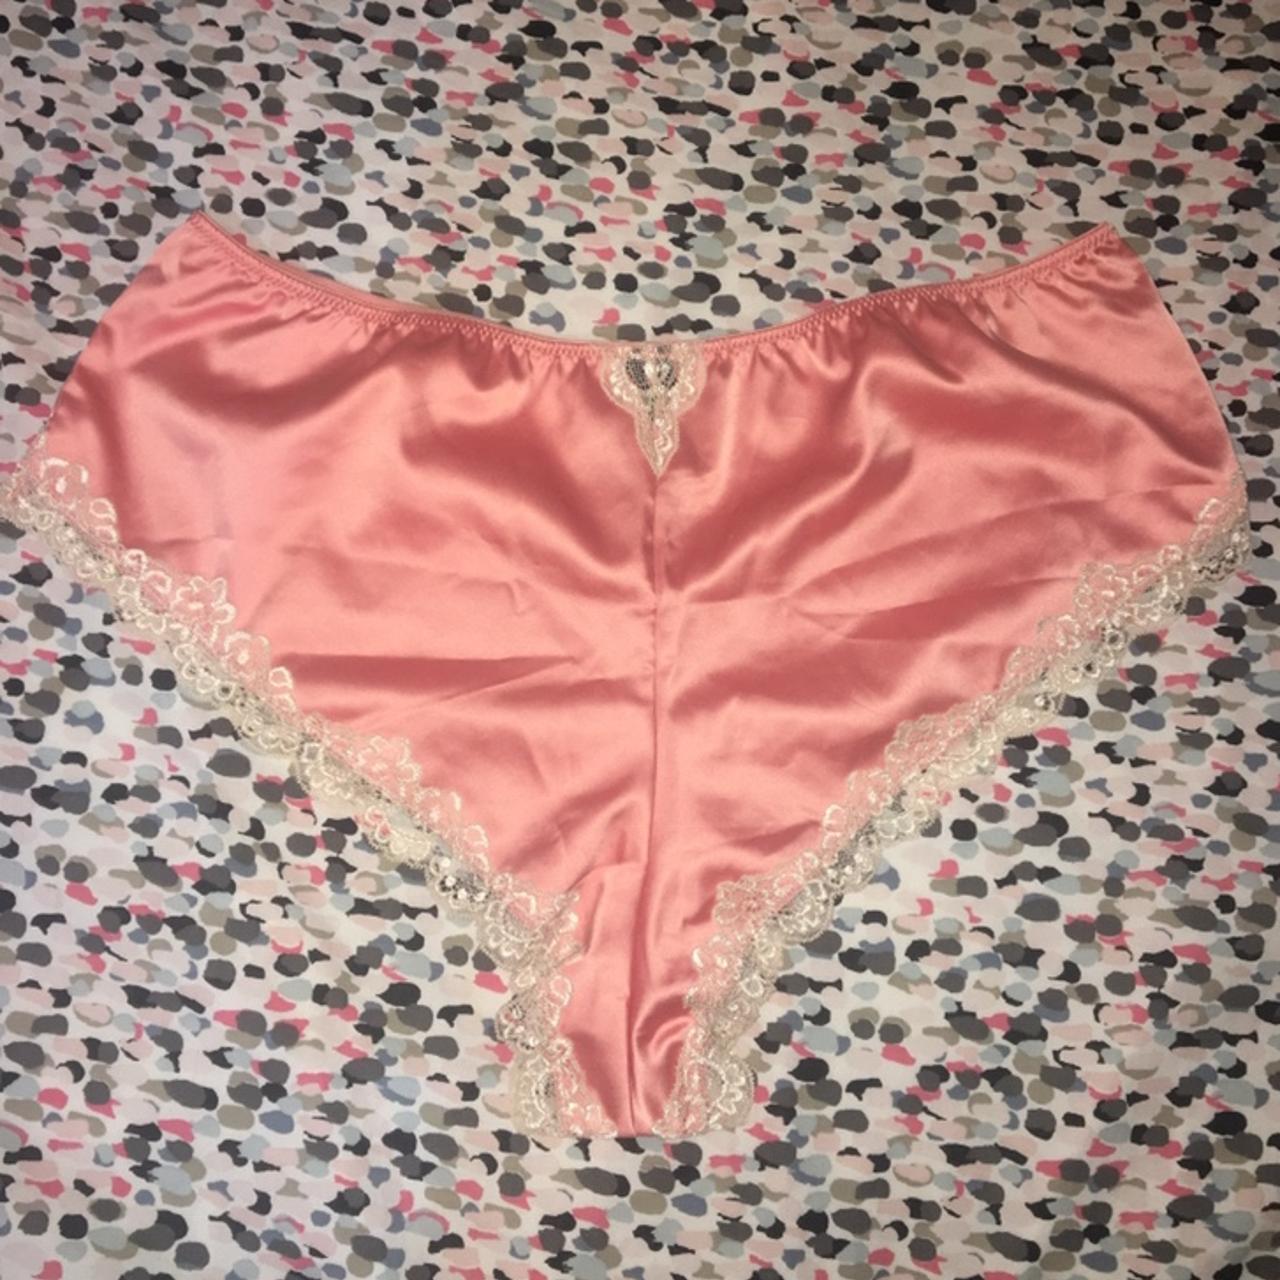 Pink satin and lace shorts/'french knickers'. Never - Depop